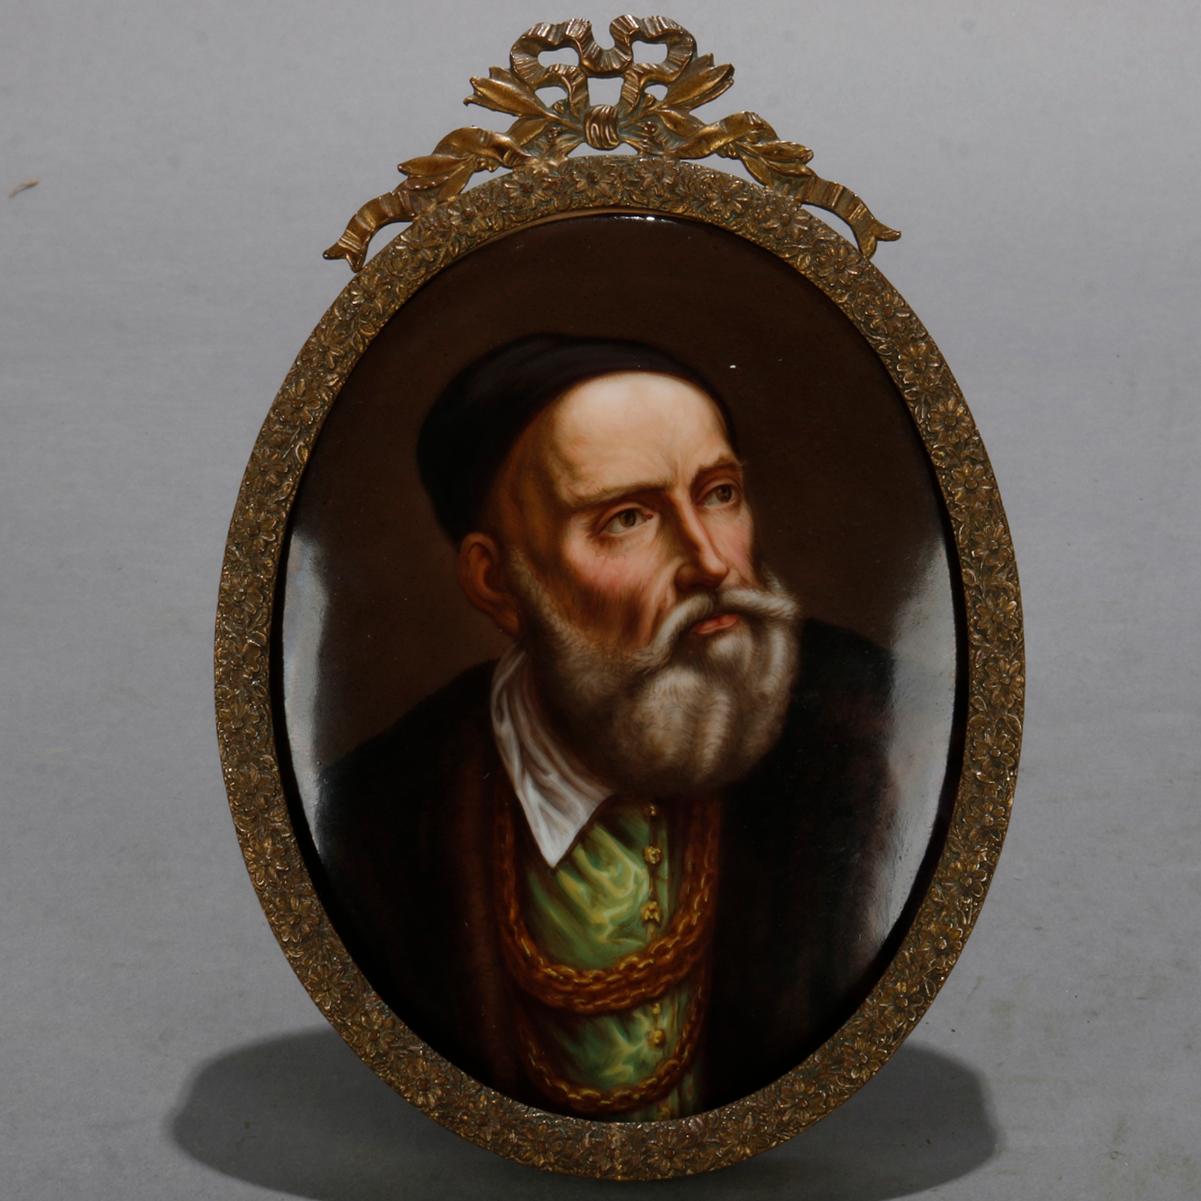 An antique portrait painting on porcelain in the manner of KPM offers portrait of Titan XXI, seated in cast frame with ribbon and bow crest, circa 1890

Measures: 5.25